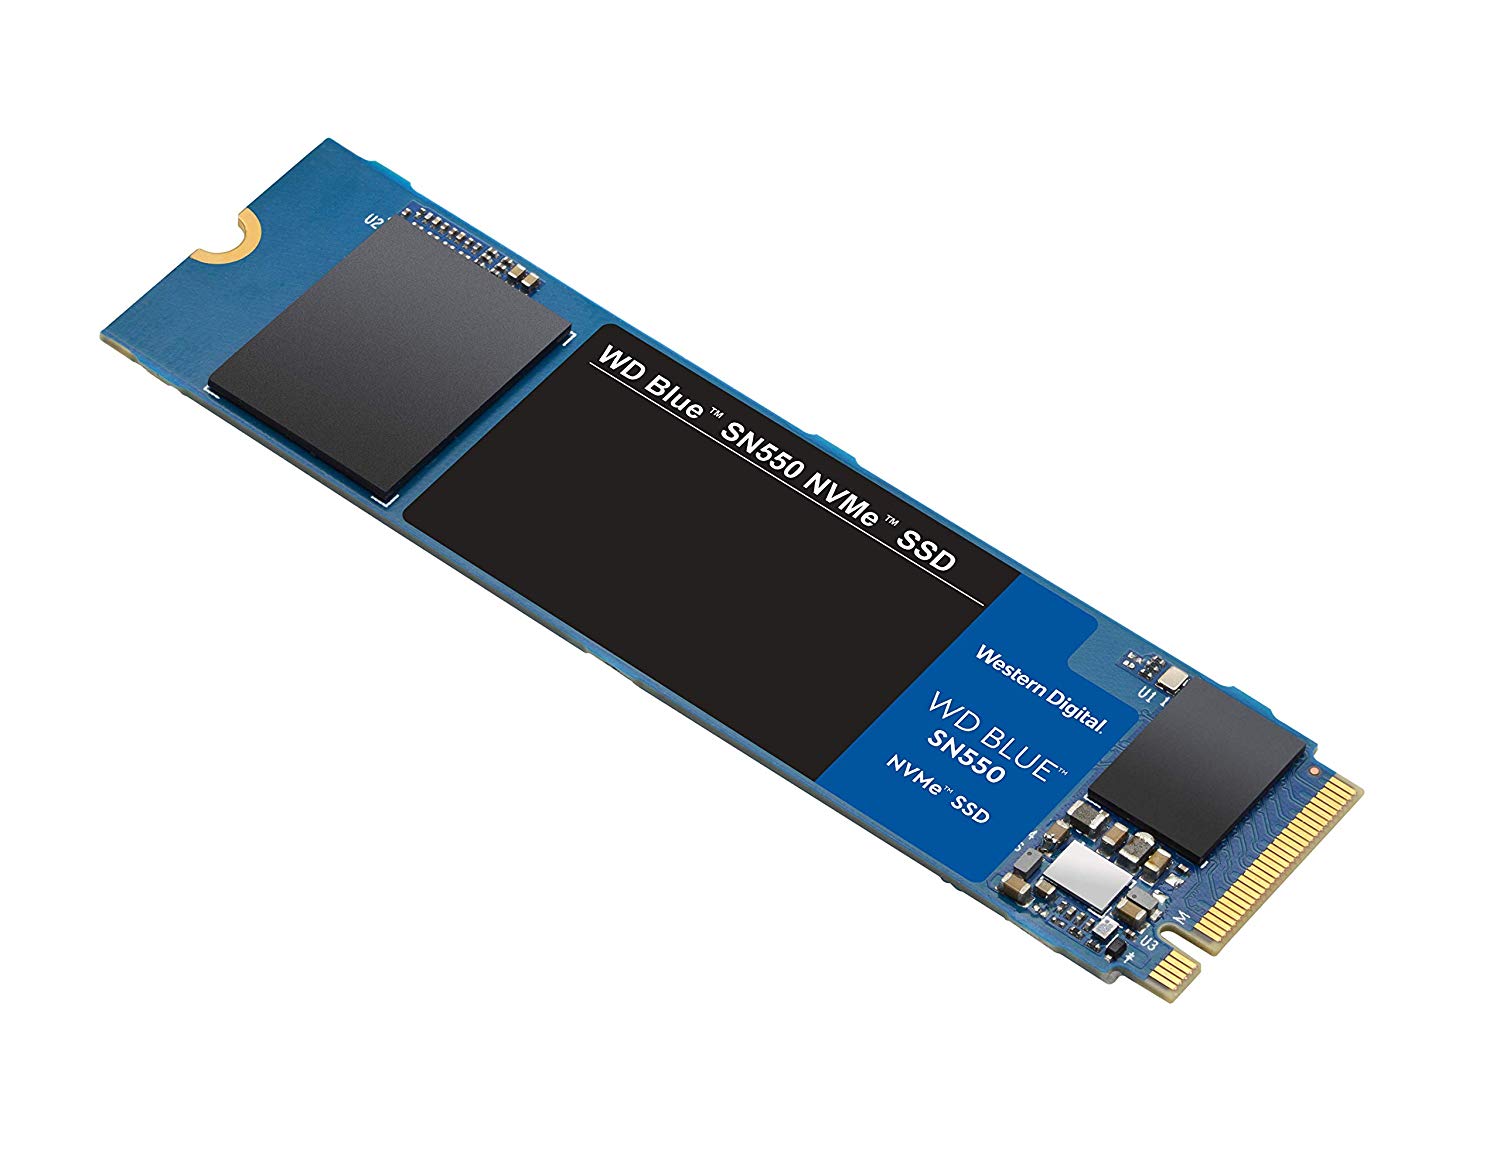 şok Harap oyuncak bebek  1TB WD Blue SN550 M.2 Gen3 x4 PCIe NVMe Internal SSD with 3D NAND for  $99.99 Shipped from Amazon - APEX DEALS